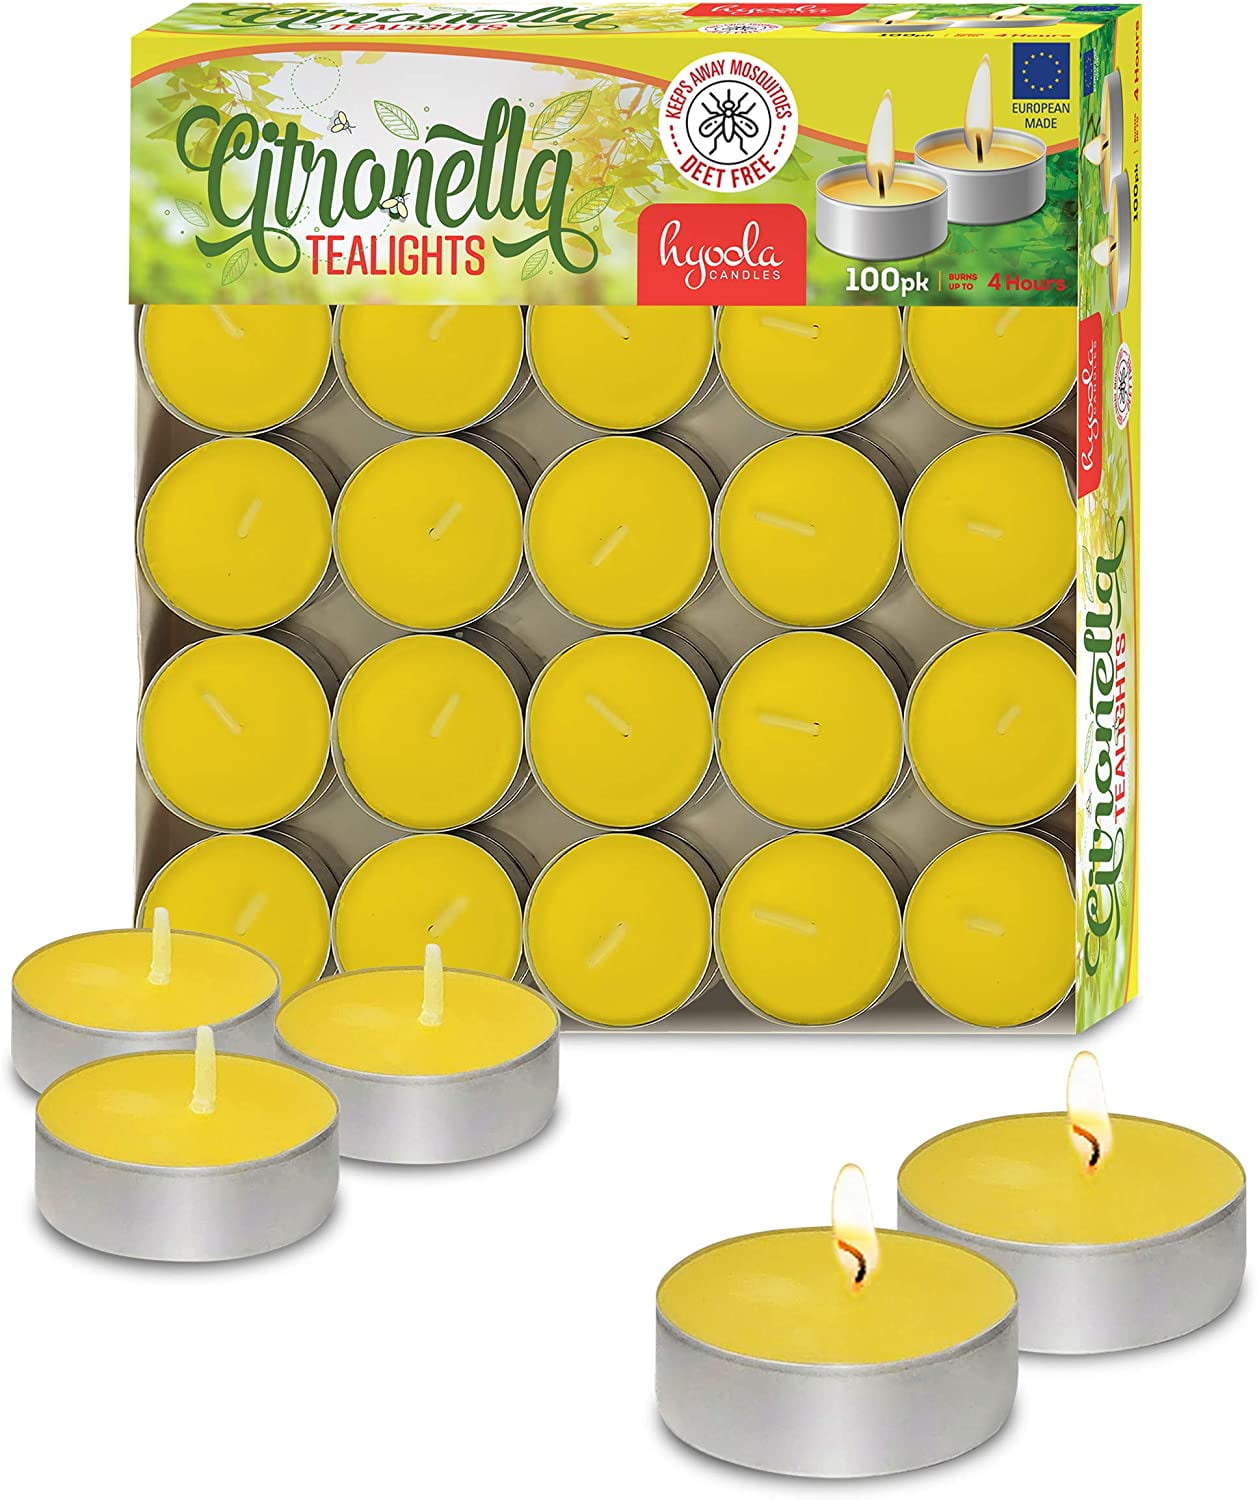 Citronella Scented Tea Light Candles Yellow Mega Candles Set of 100 